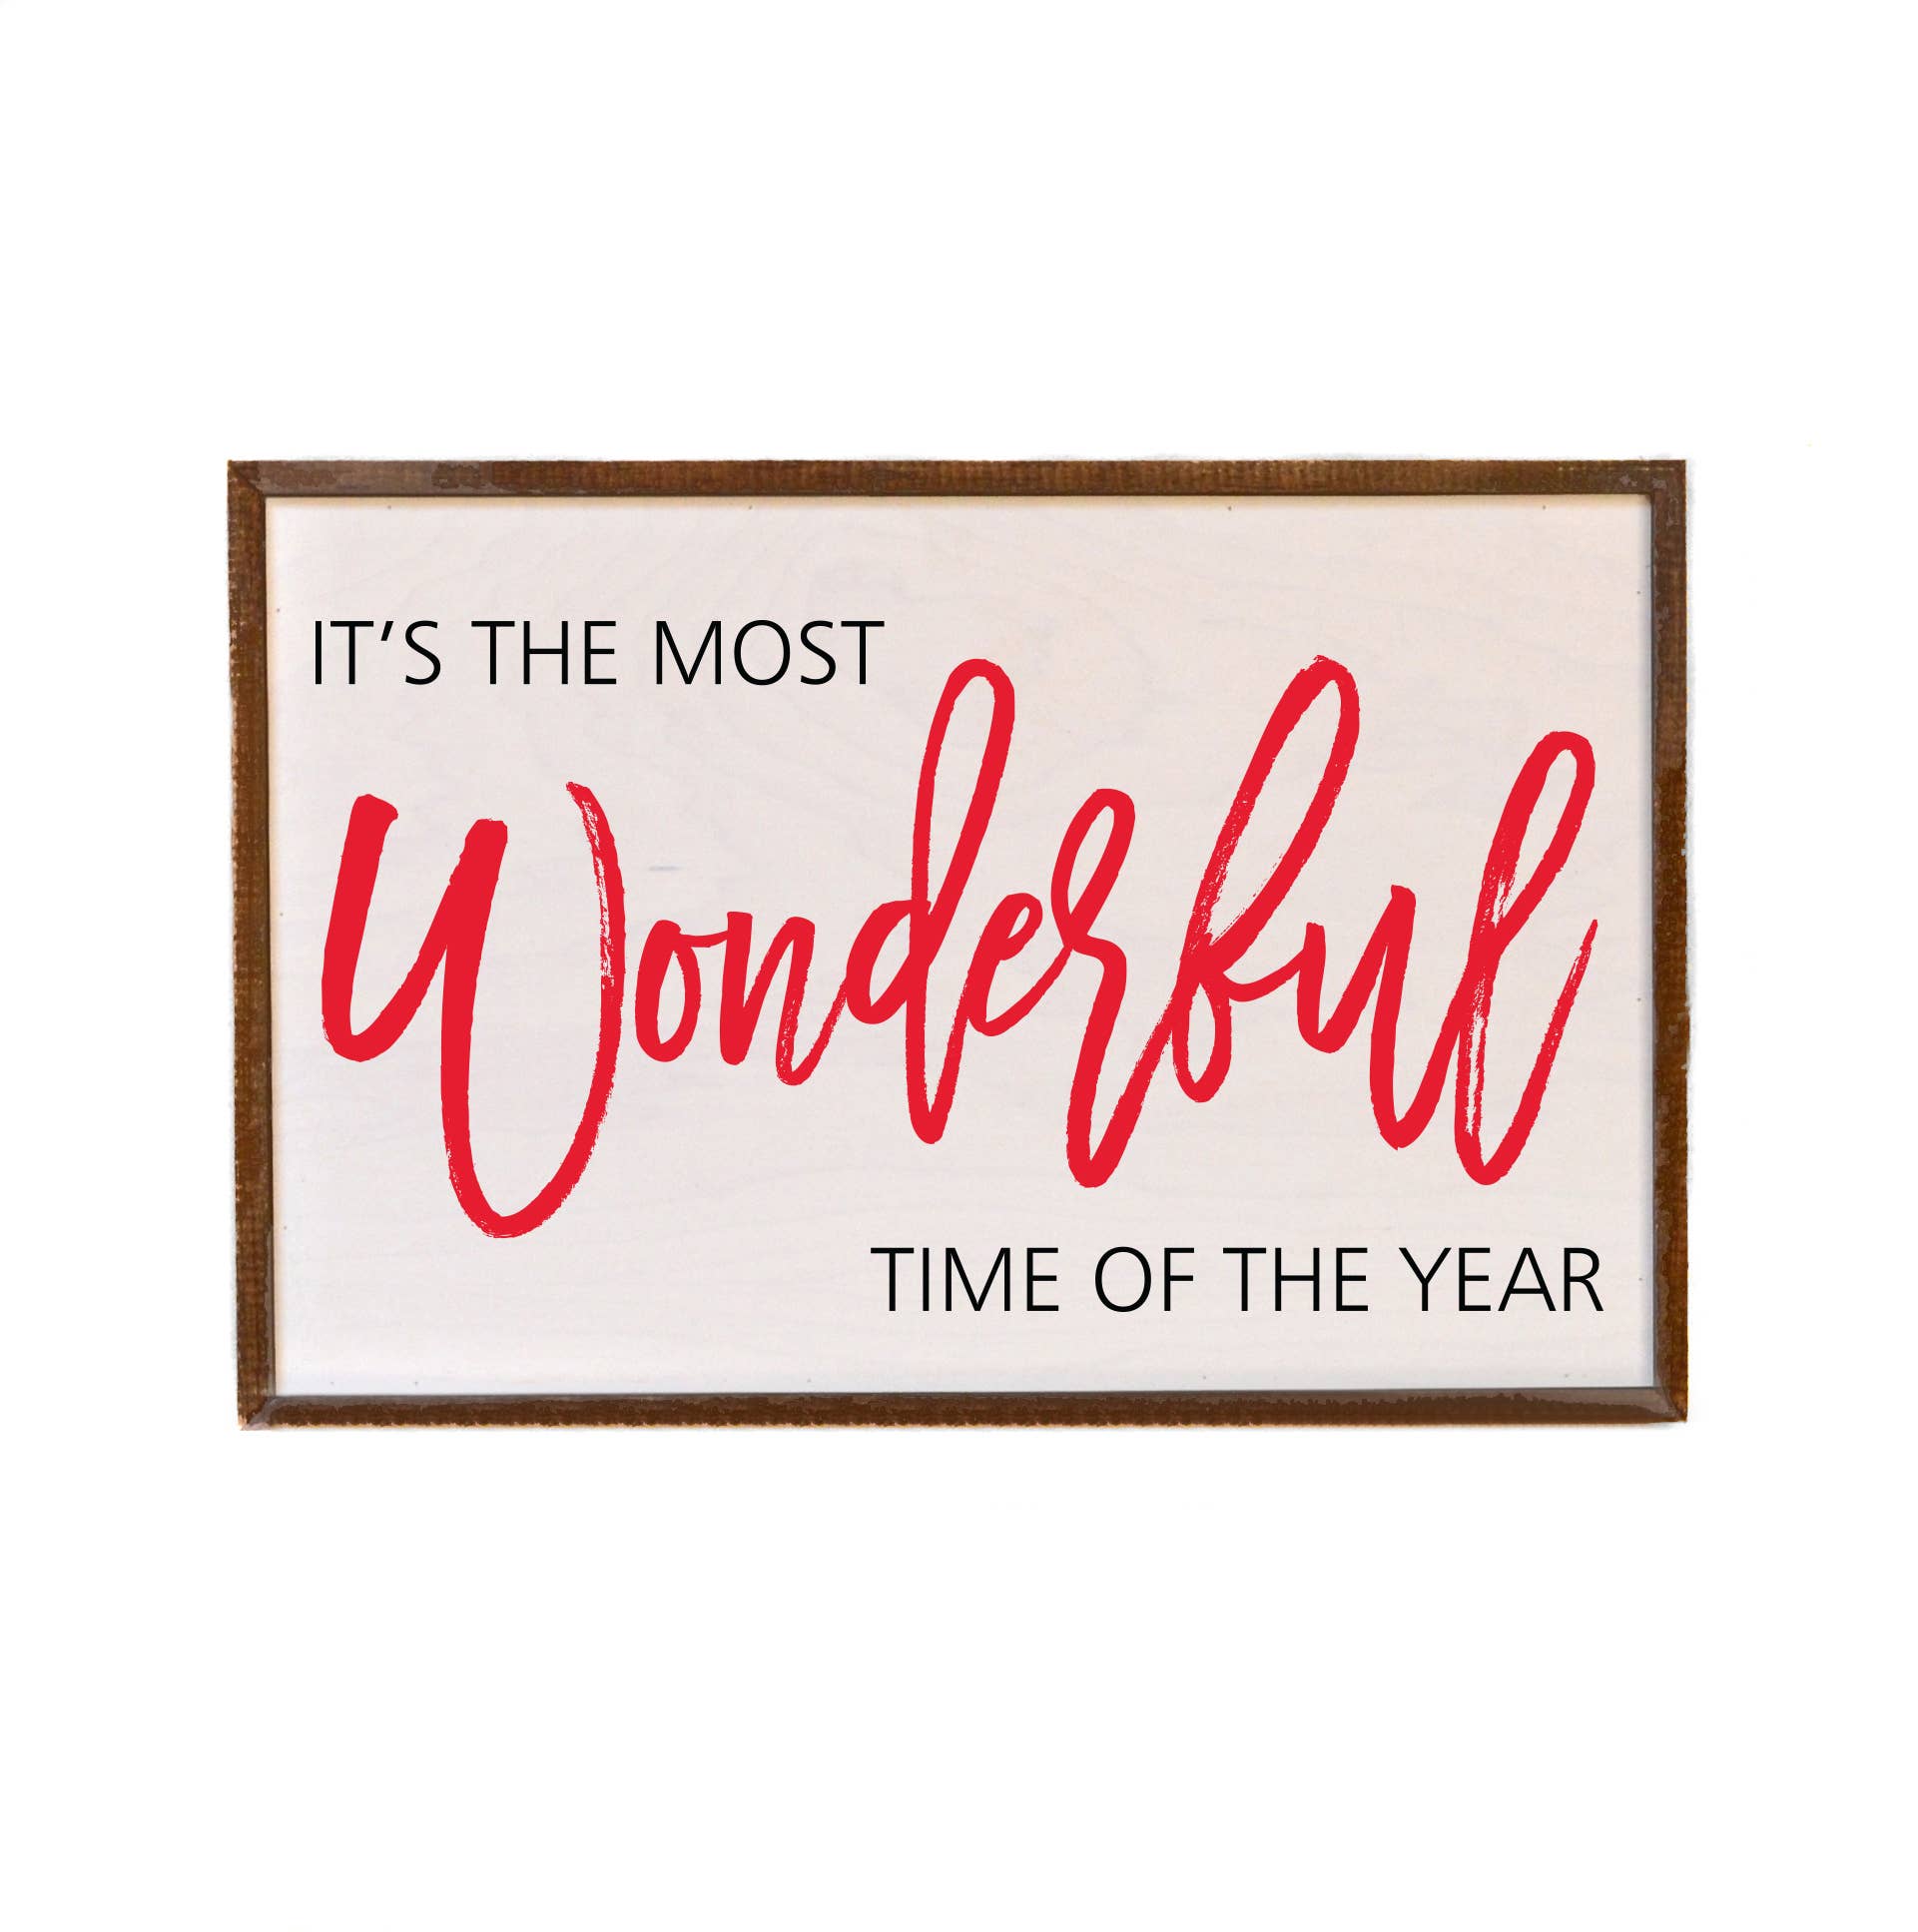 The Most Wonderful Time of the Year 12x18 Farmhouse Sign